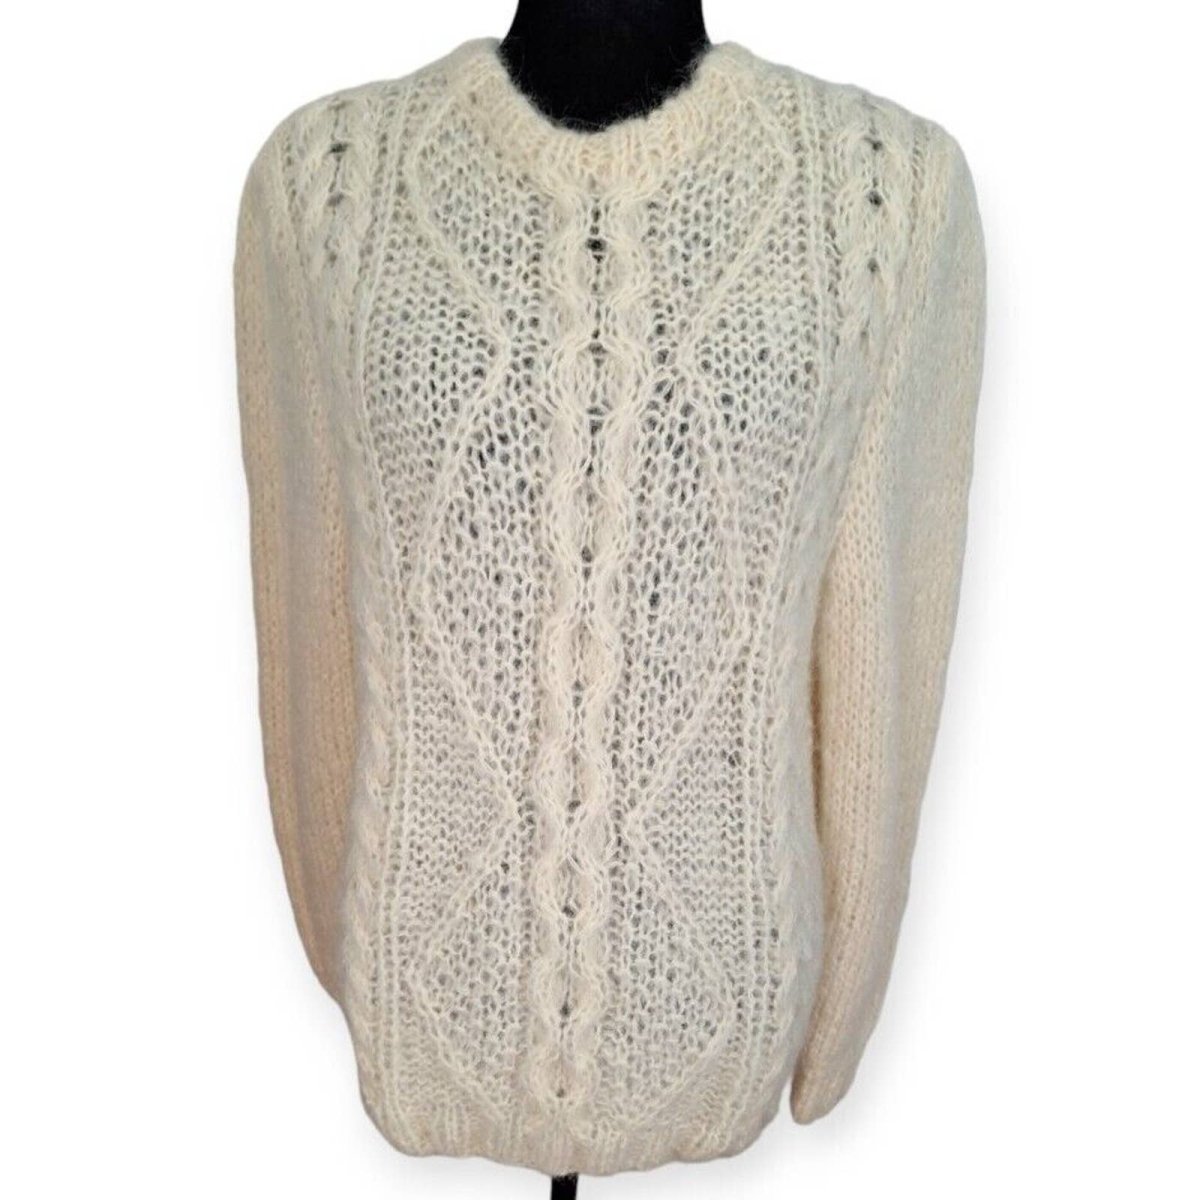 Vintage 80s/90s Cream Loose Knit Italian Wool Blend Sweater Women's Size M - themallvintage The Mall Vintage